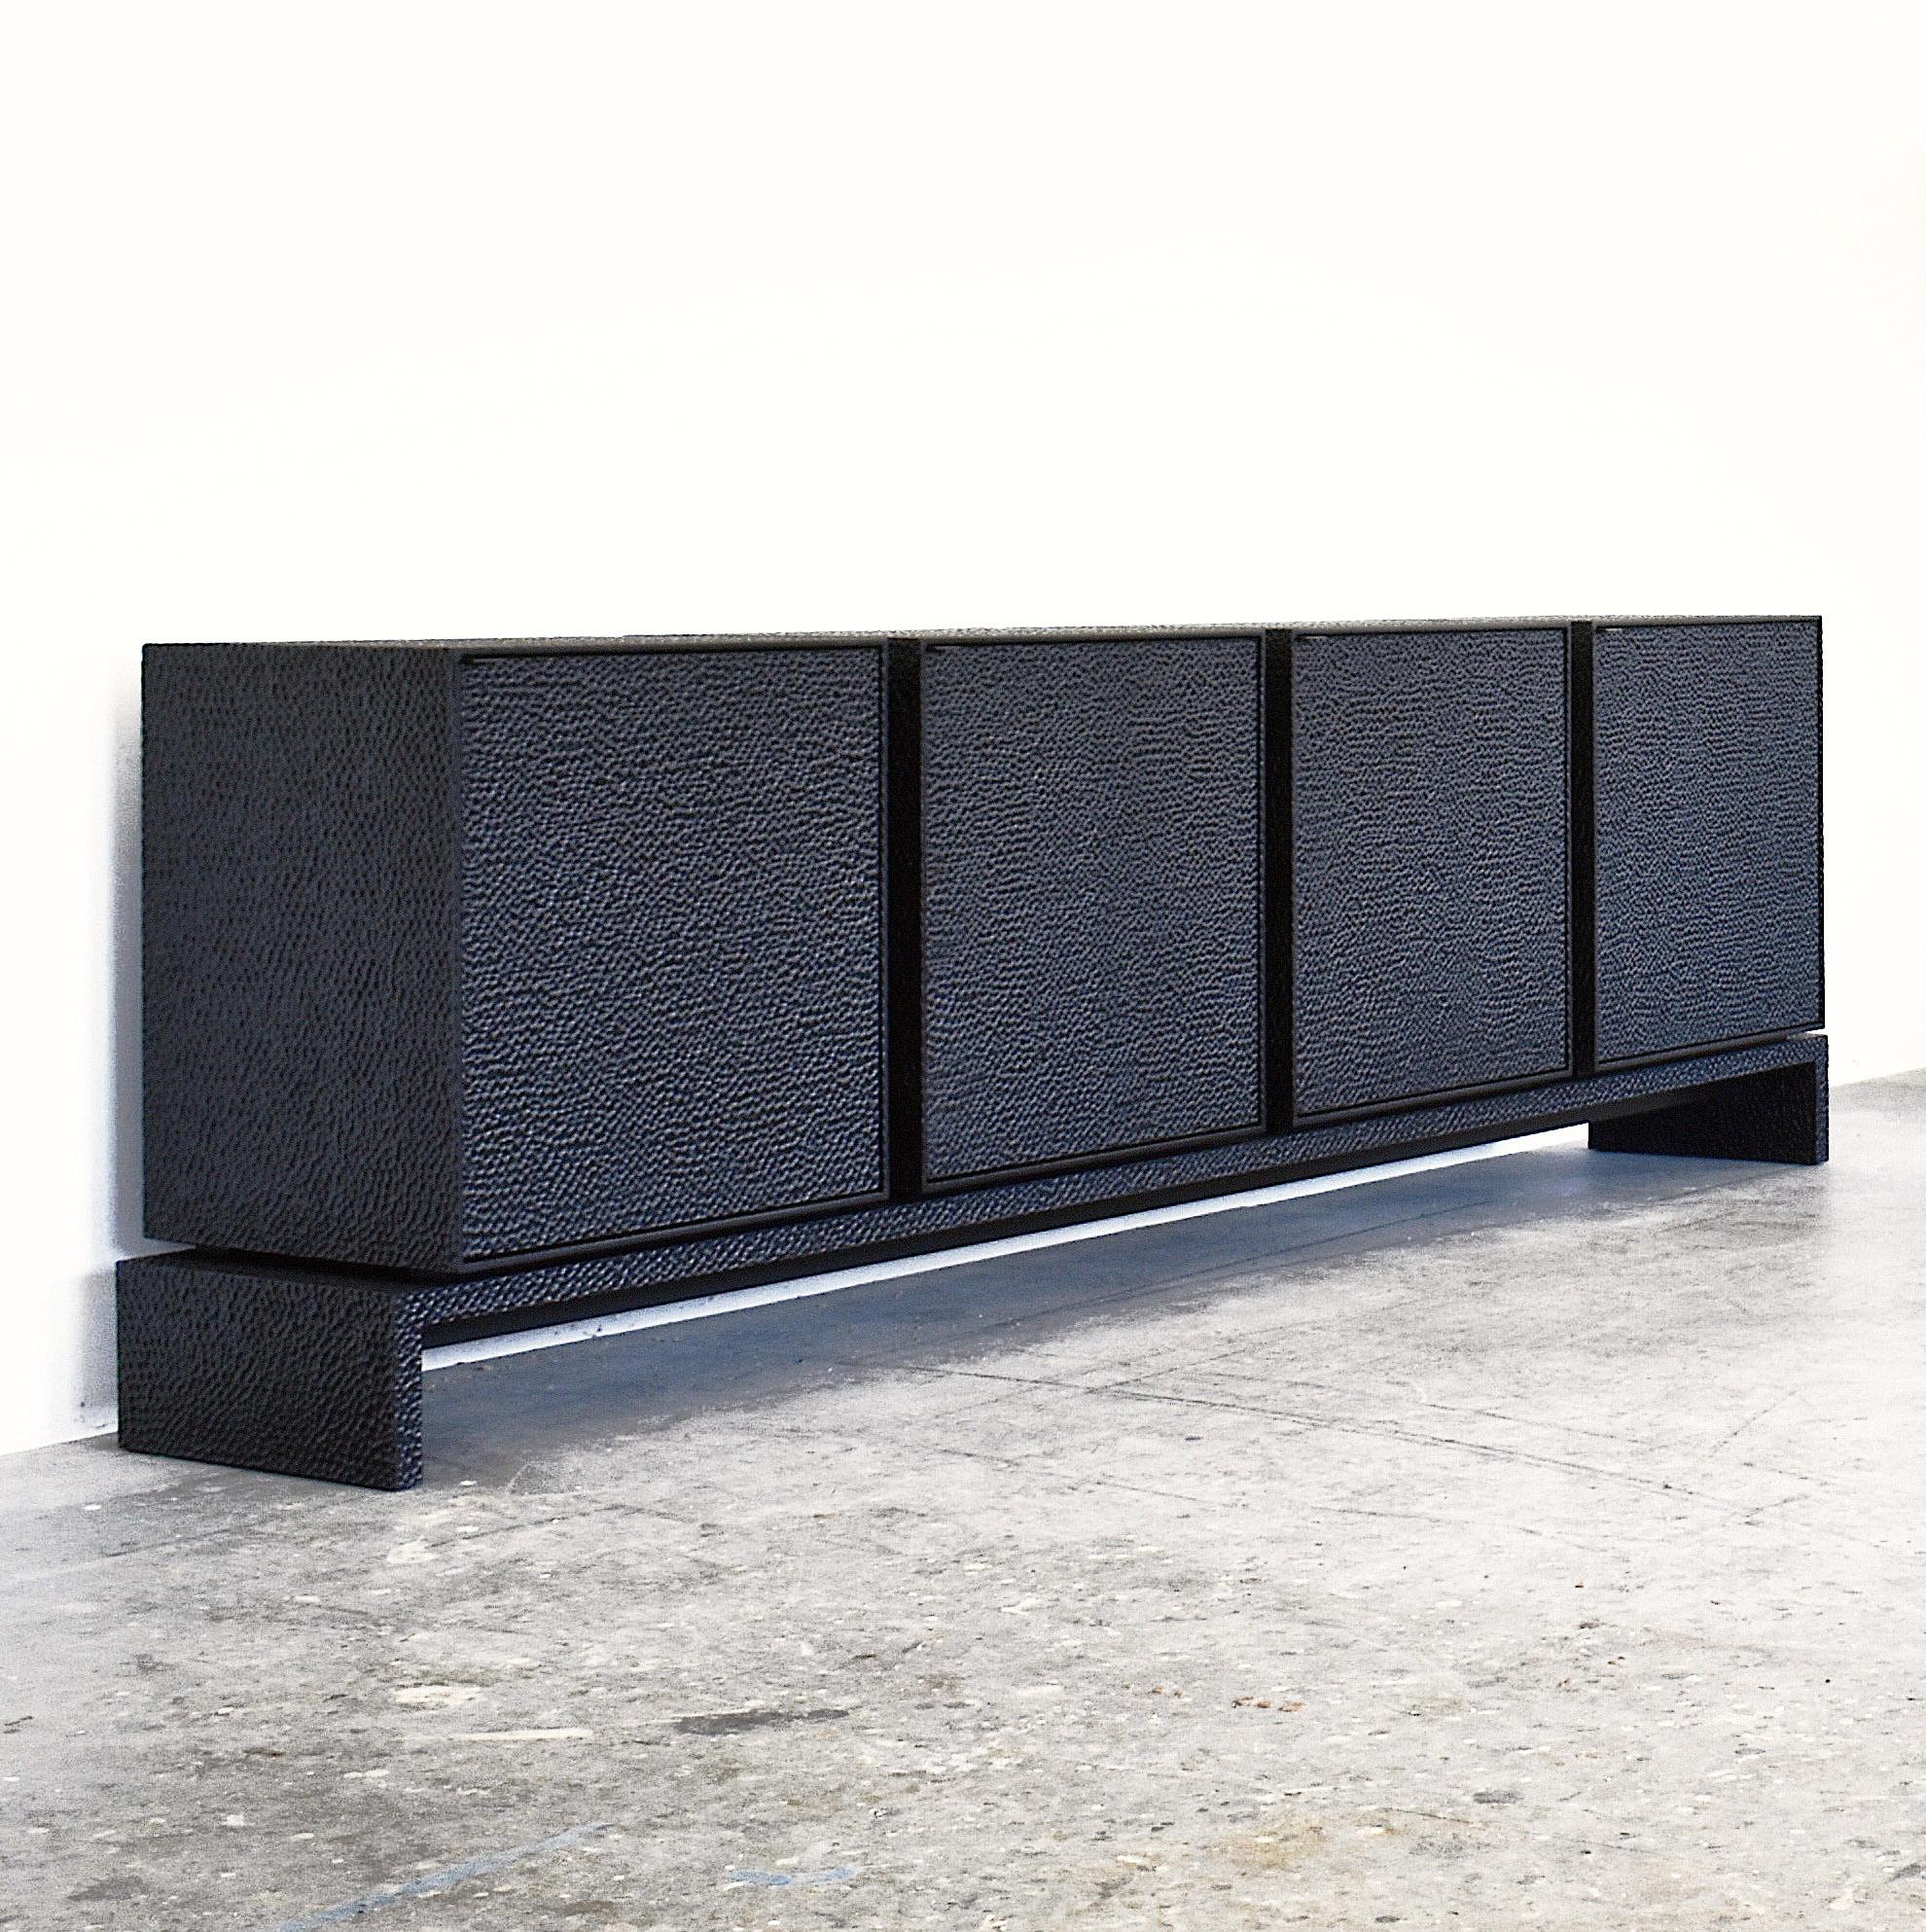 Credenza sculpted by John Eric Byers
Dimensions: 81.3 x 274.3 x 45.7 cm
Materials: Carved blackened maple, brass

All works are individually handmade to order.

John Eric Byers creates geometrically inspired pieces that are minimal, emotional,